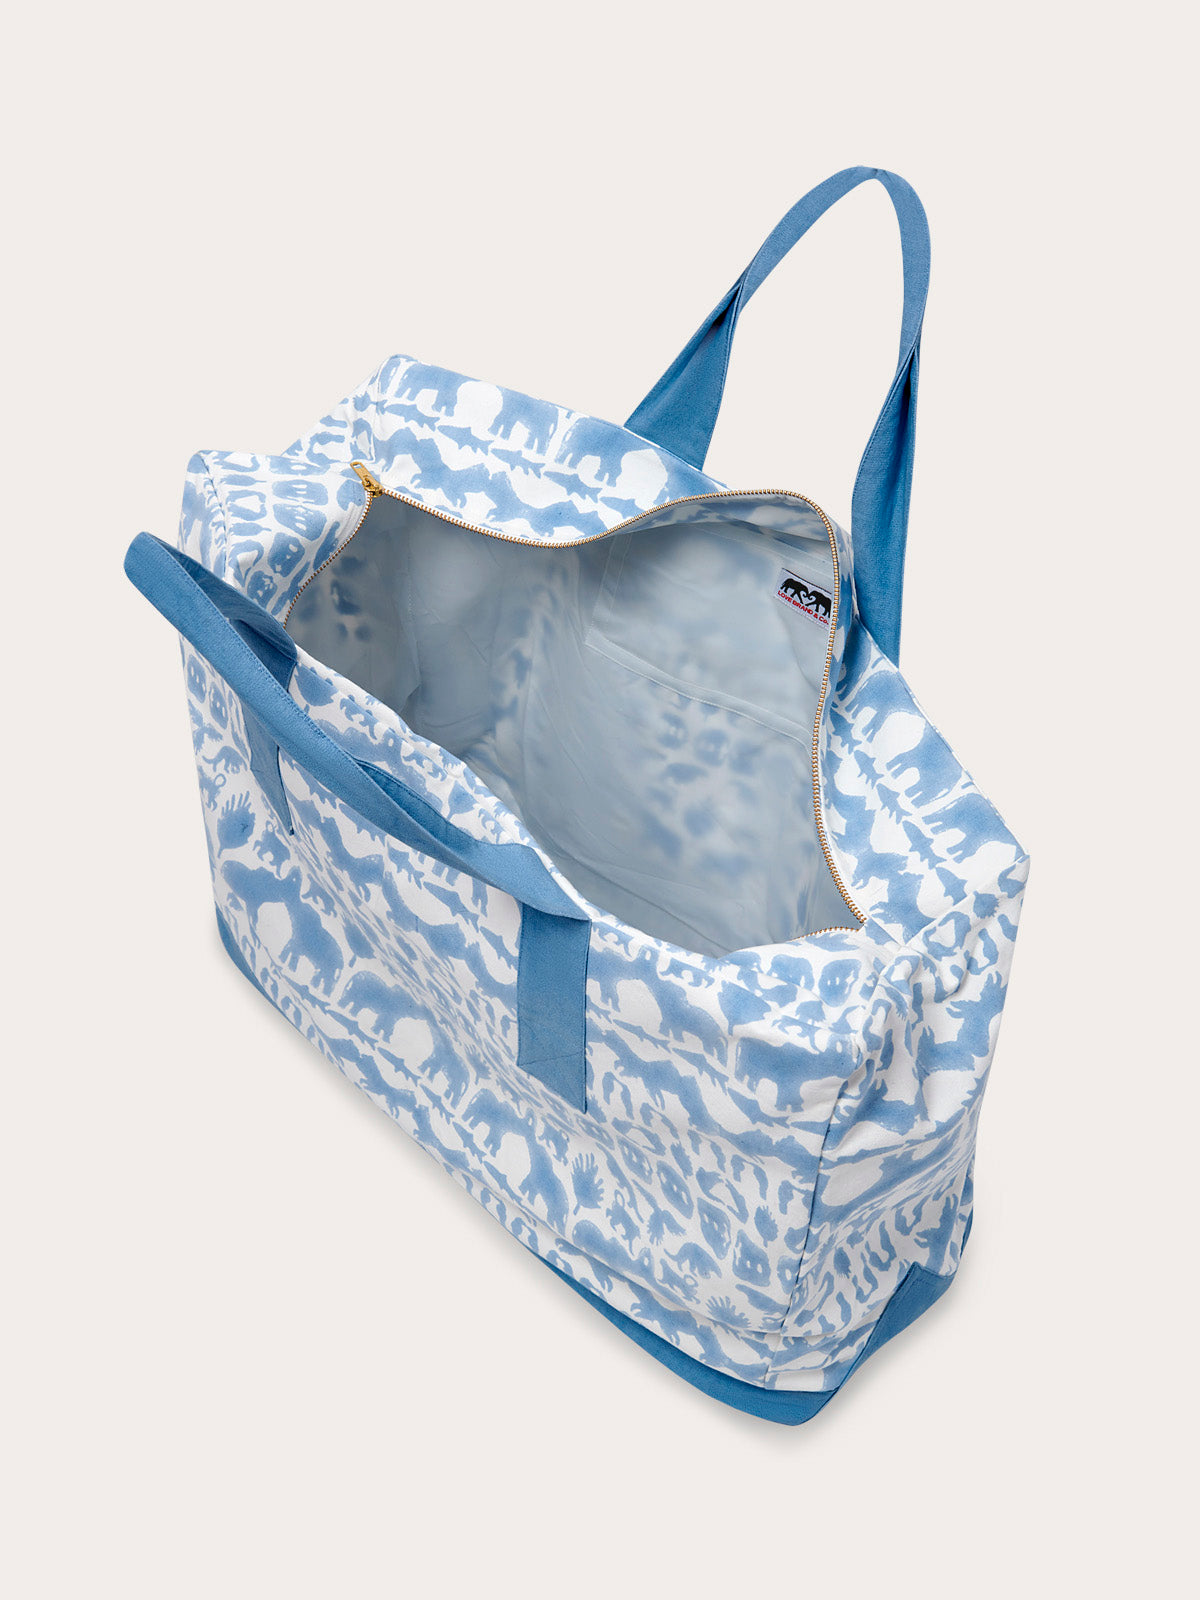 Sky blue canvas tote bag featuring Coexist animal print, open view showing interior pockets, and blue straps.